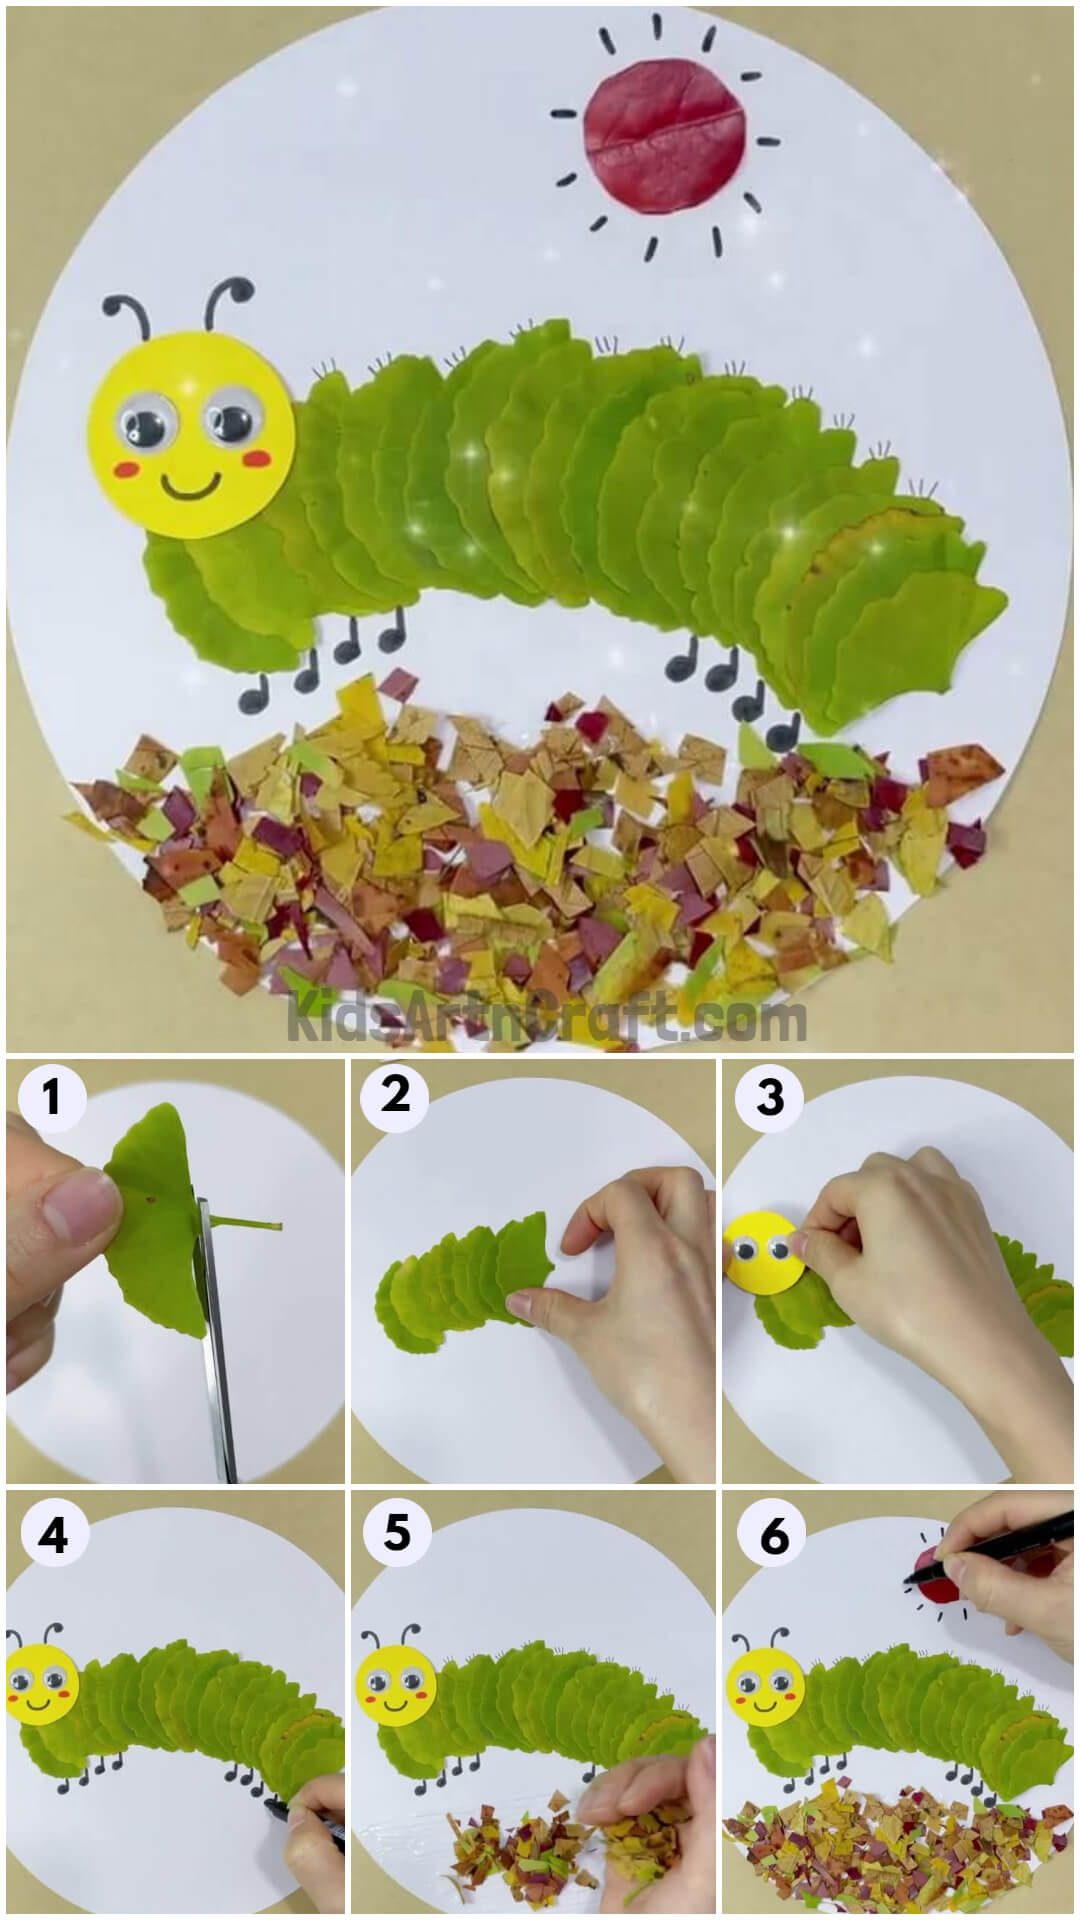 Lovely Caterpillar And Sun Craft With Leaves, Paper, And Googly Eyes